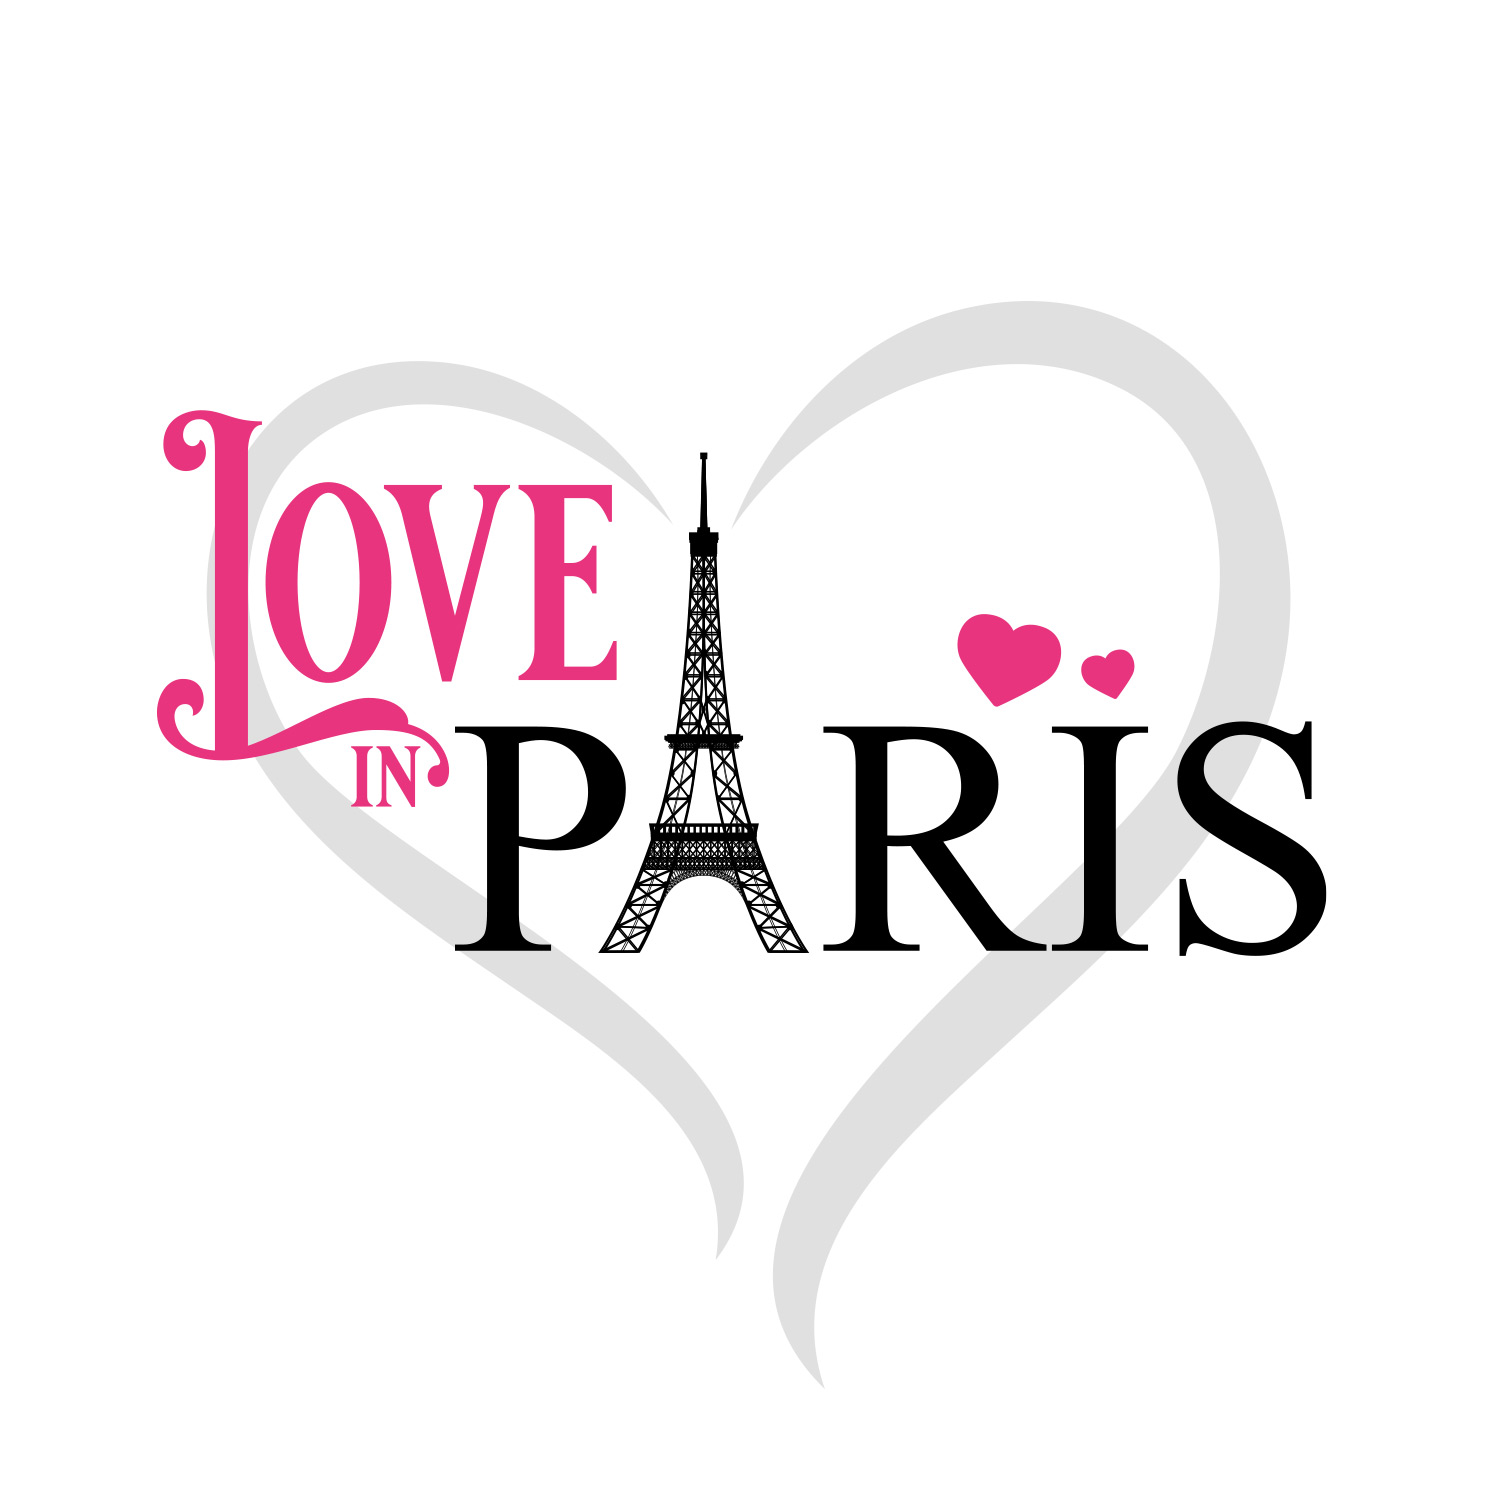 Souvenirs from Love in Paris